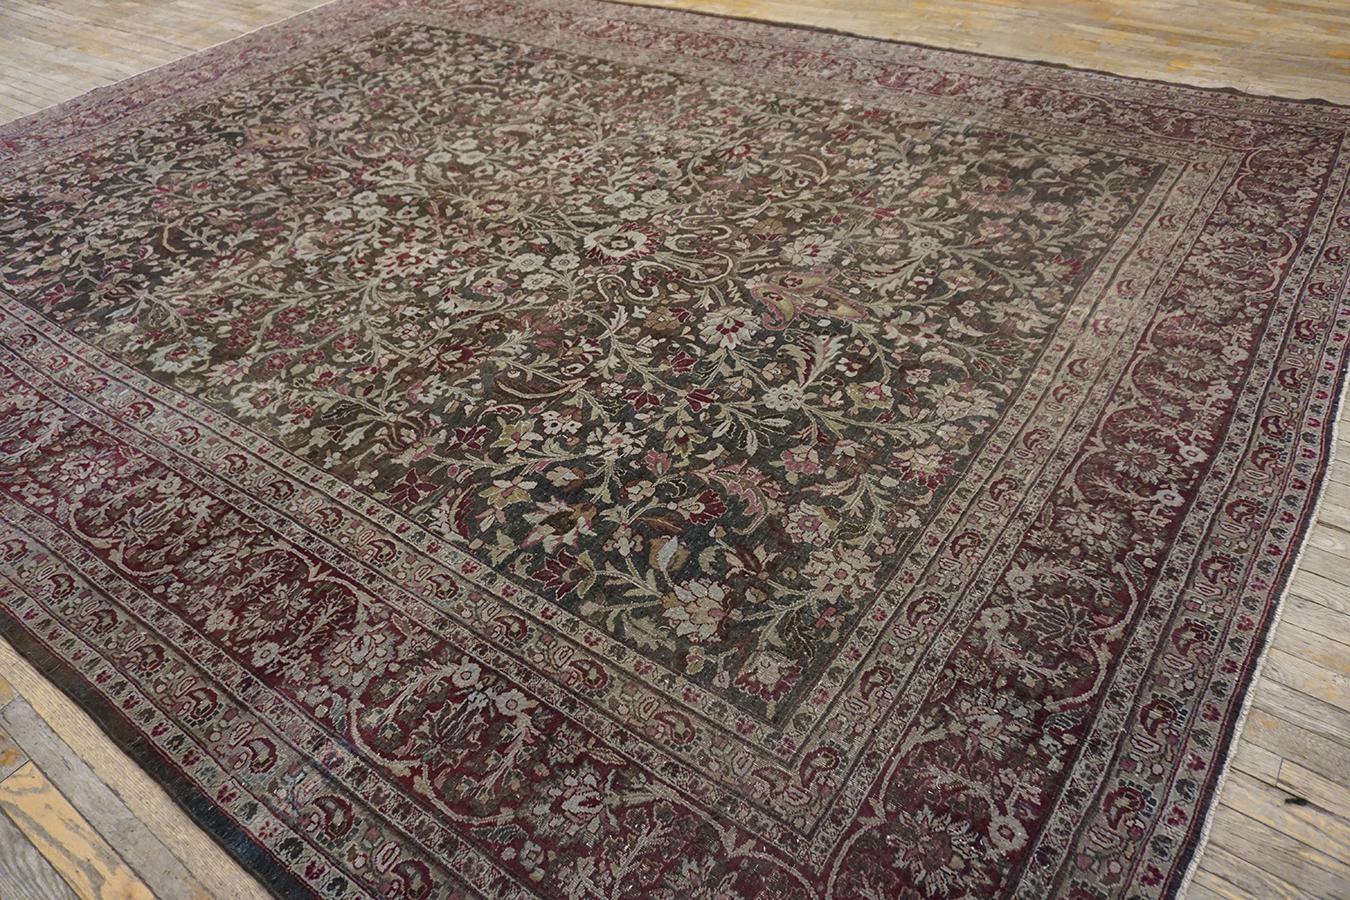 Hand-Knotted Early 20th Century N.E. Persian Khorassan Moud Carpet (10' x 13'4